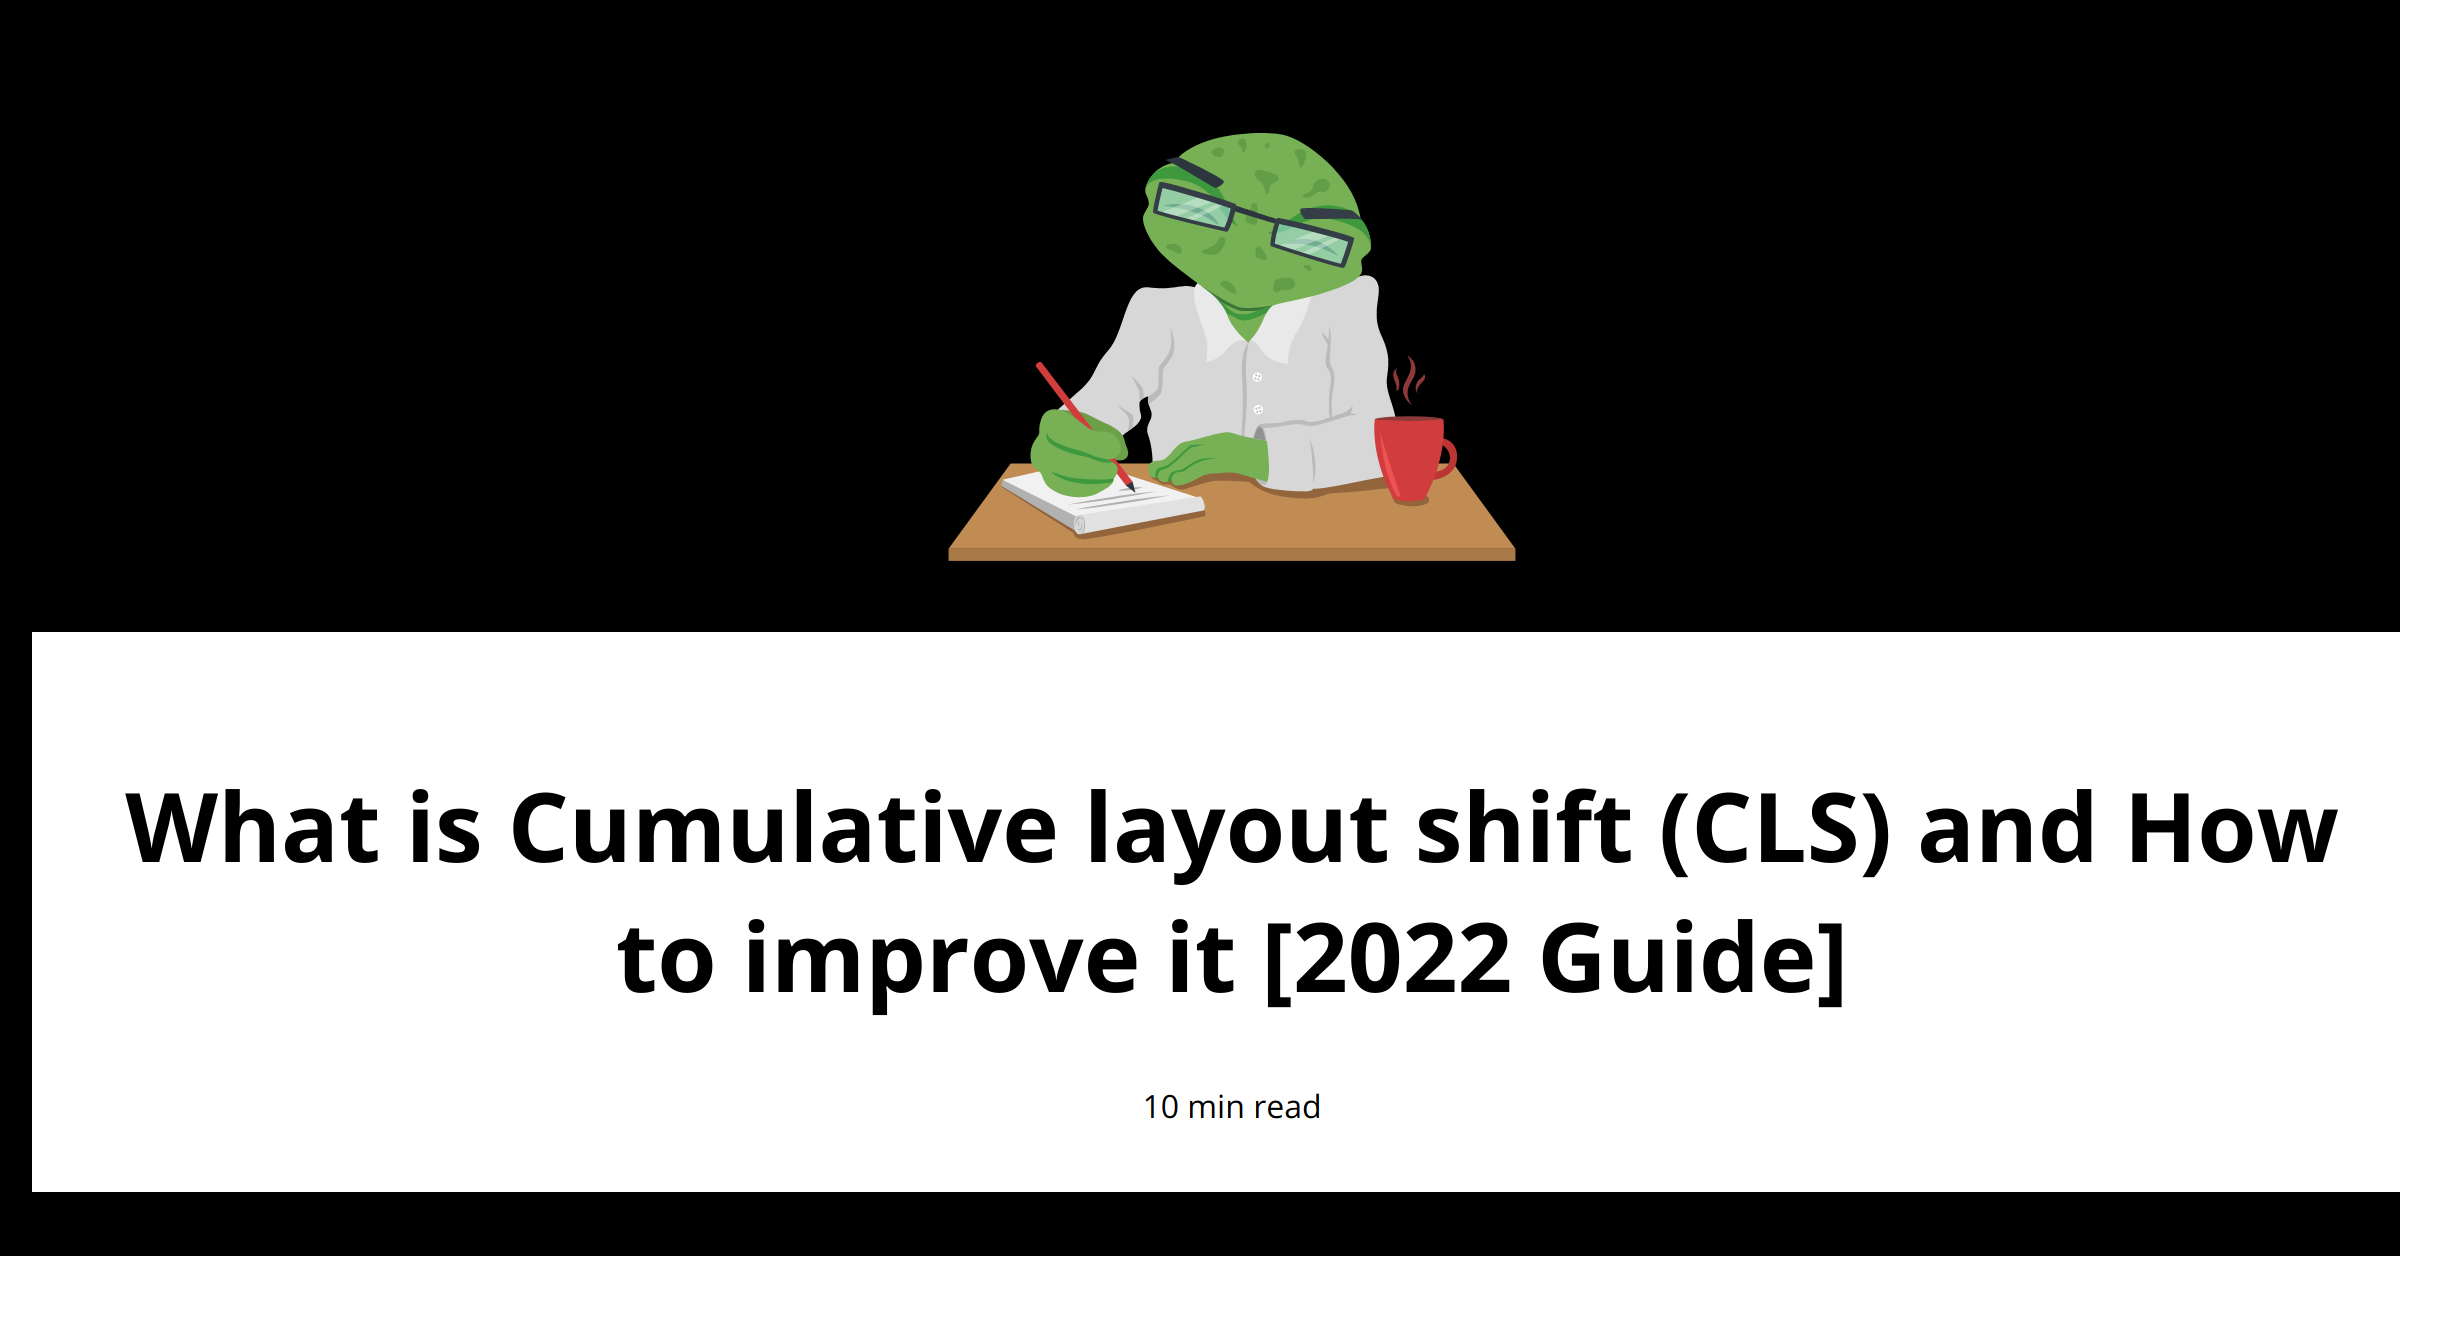 What is Cumulative layout shift (CLS) and How to improve it [2022 Guide]